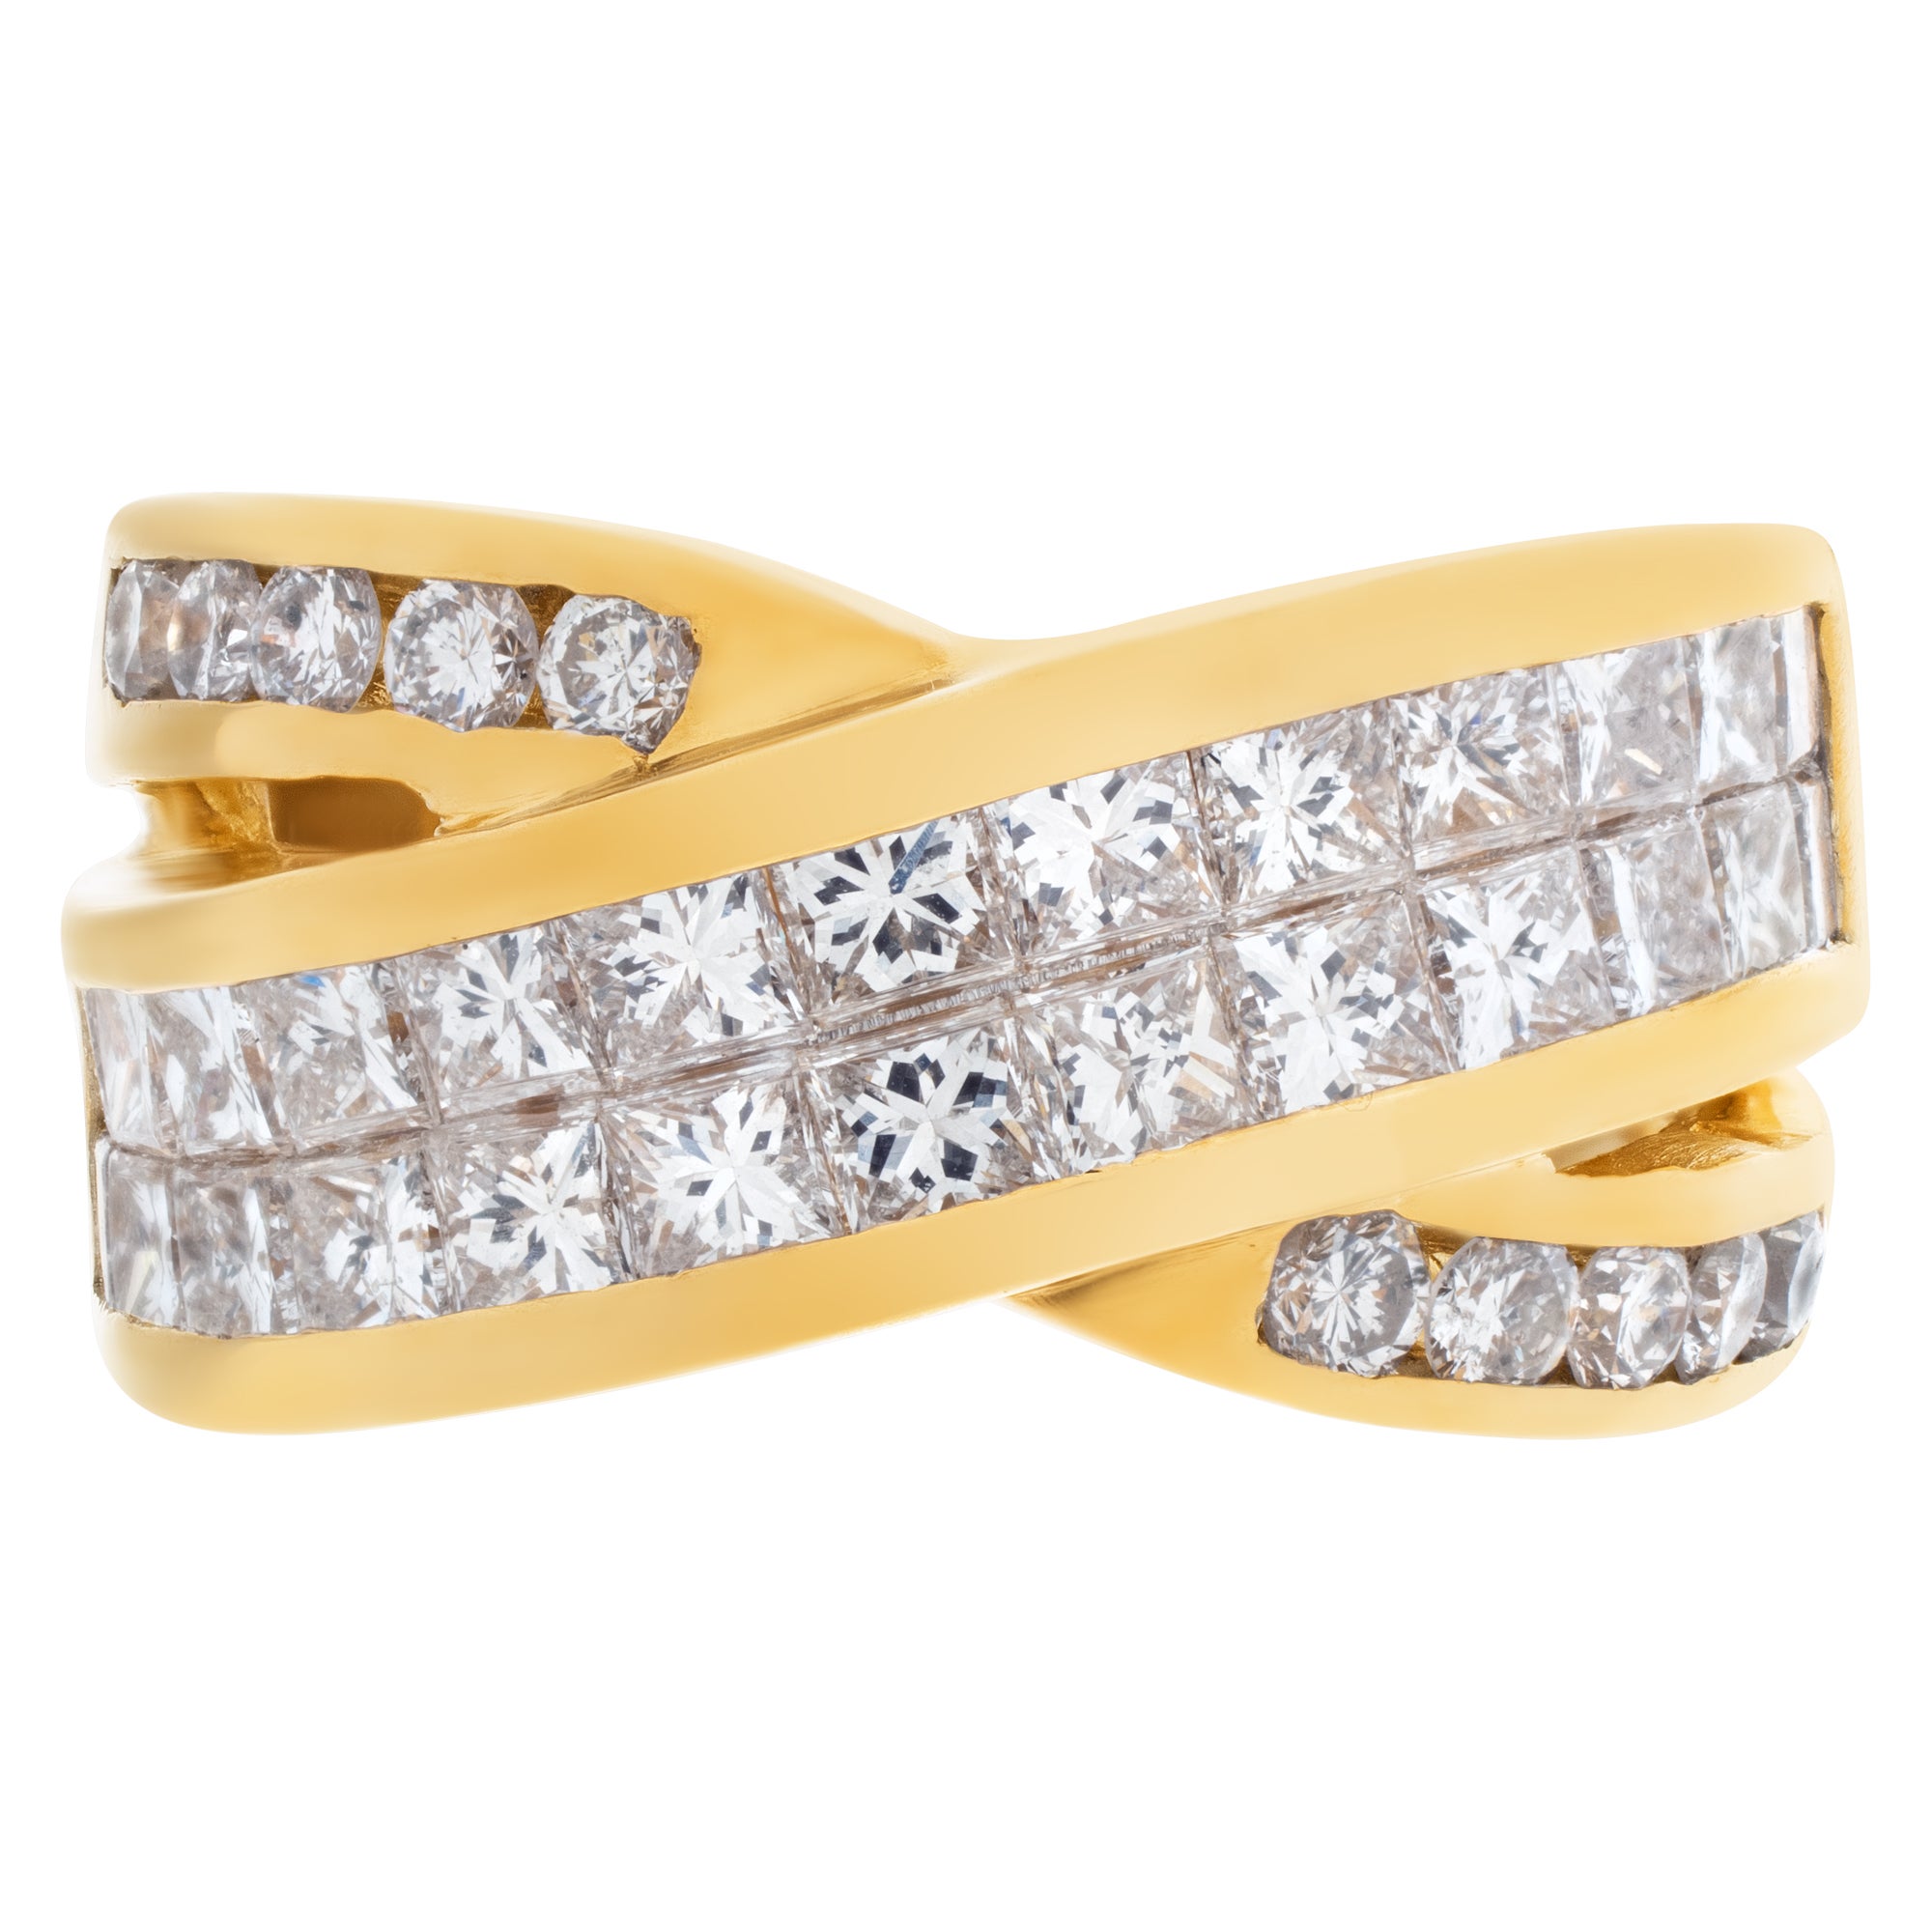 18k Yellow Gold Criss Cross Diamond Ring with over 3 Carats For Sale